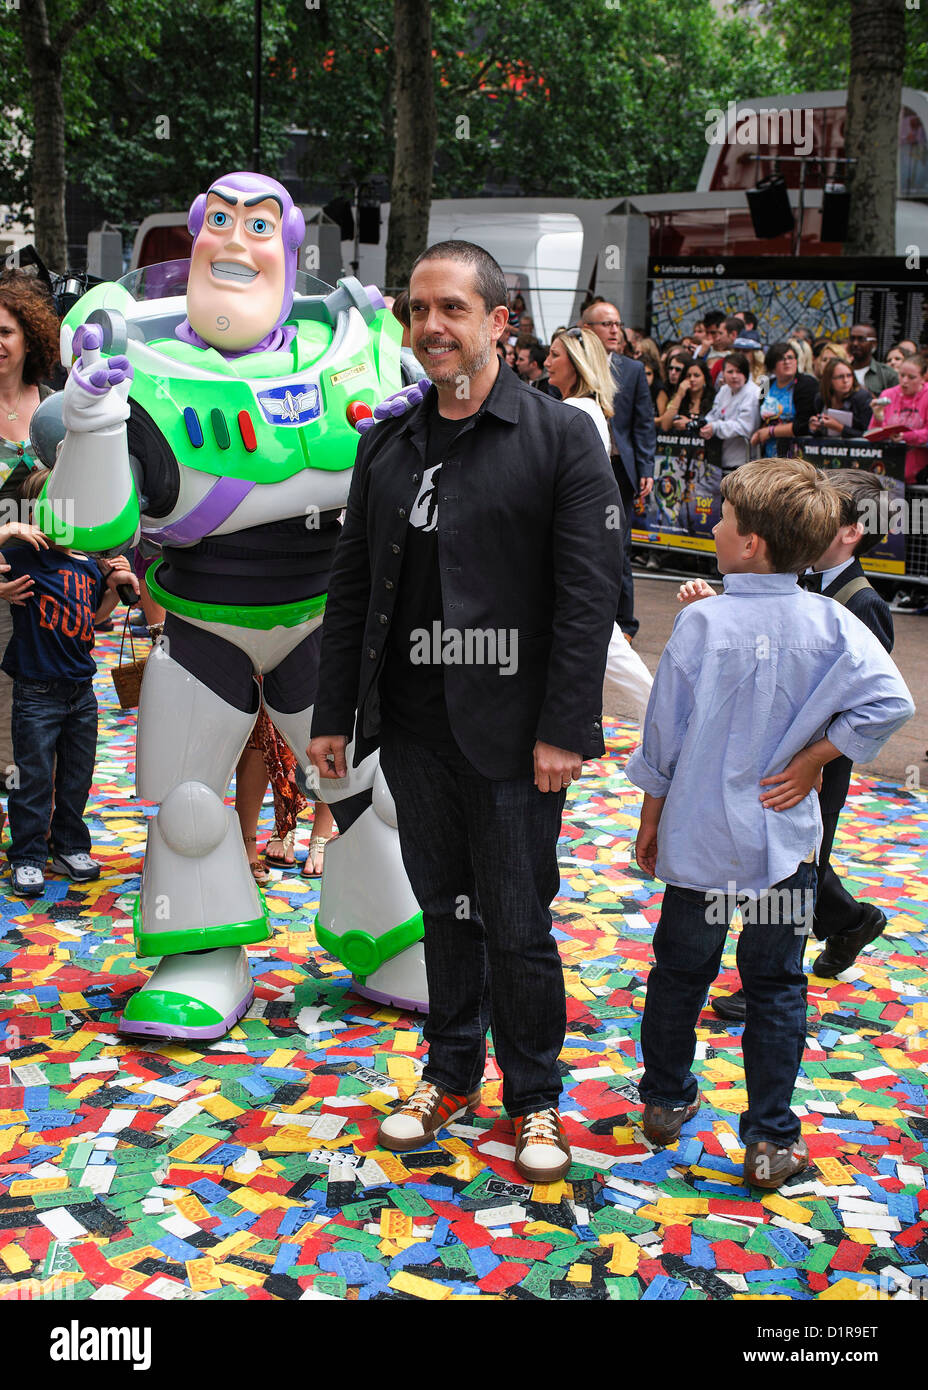 Buzz Lightyear and Director Lee Unkrich attends the Uk Premiere of Toy Story 3 at The Empire Leicester Square, London, 18 July 2010. Picture by Julie Edwards. Stock Photo